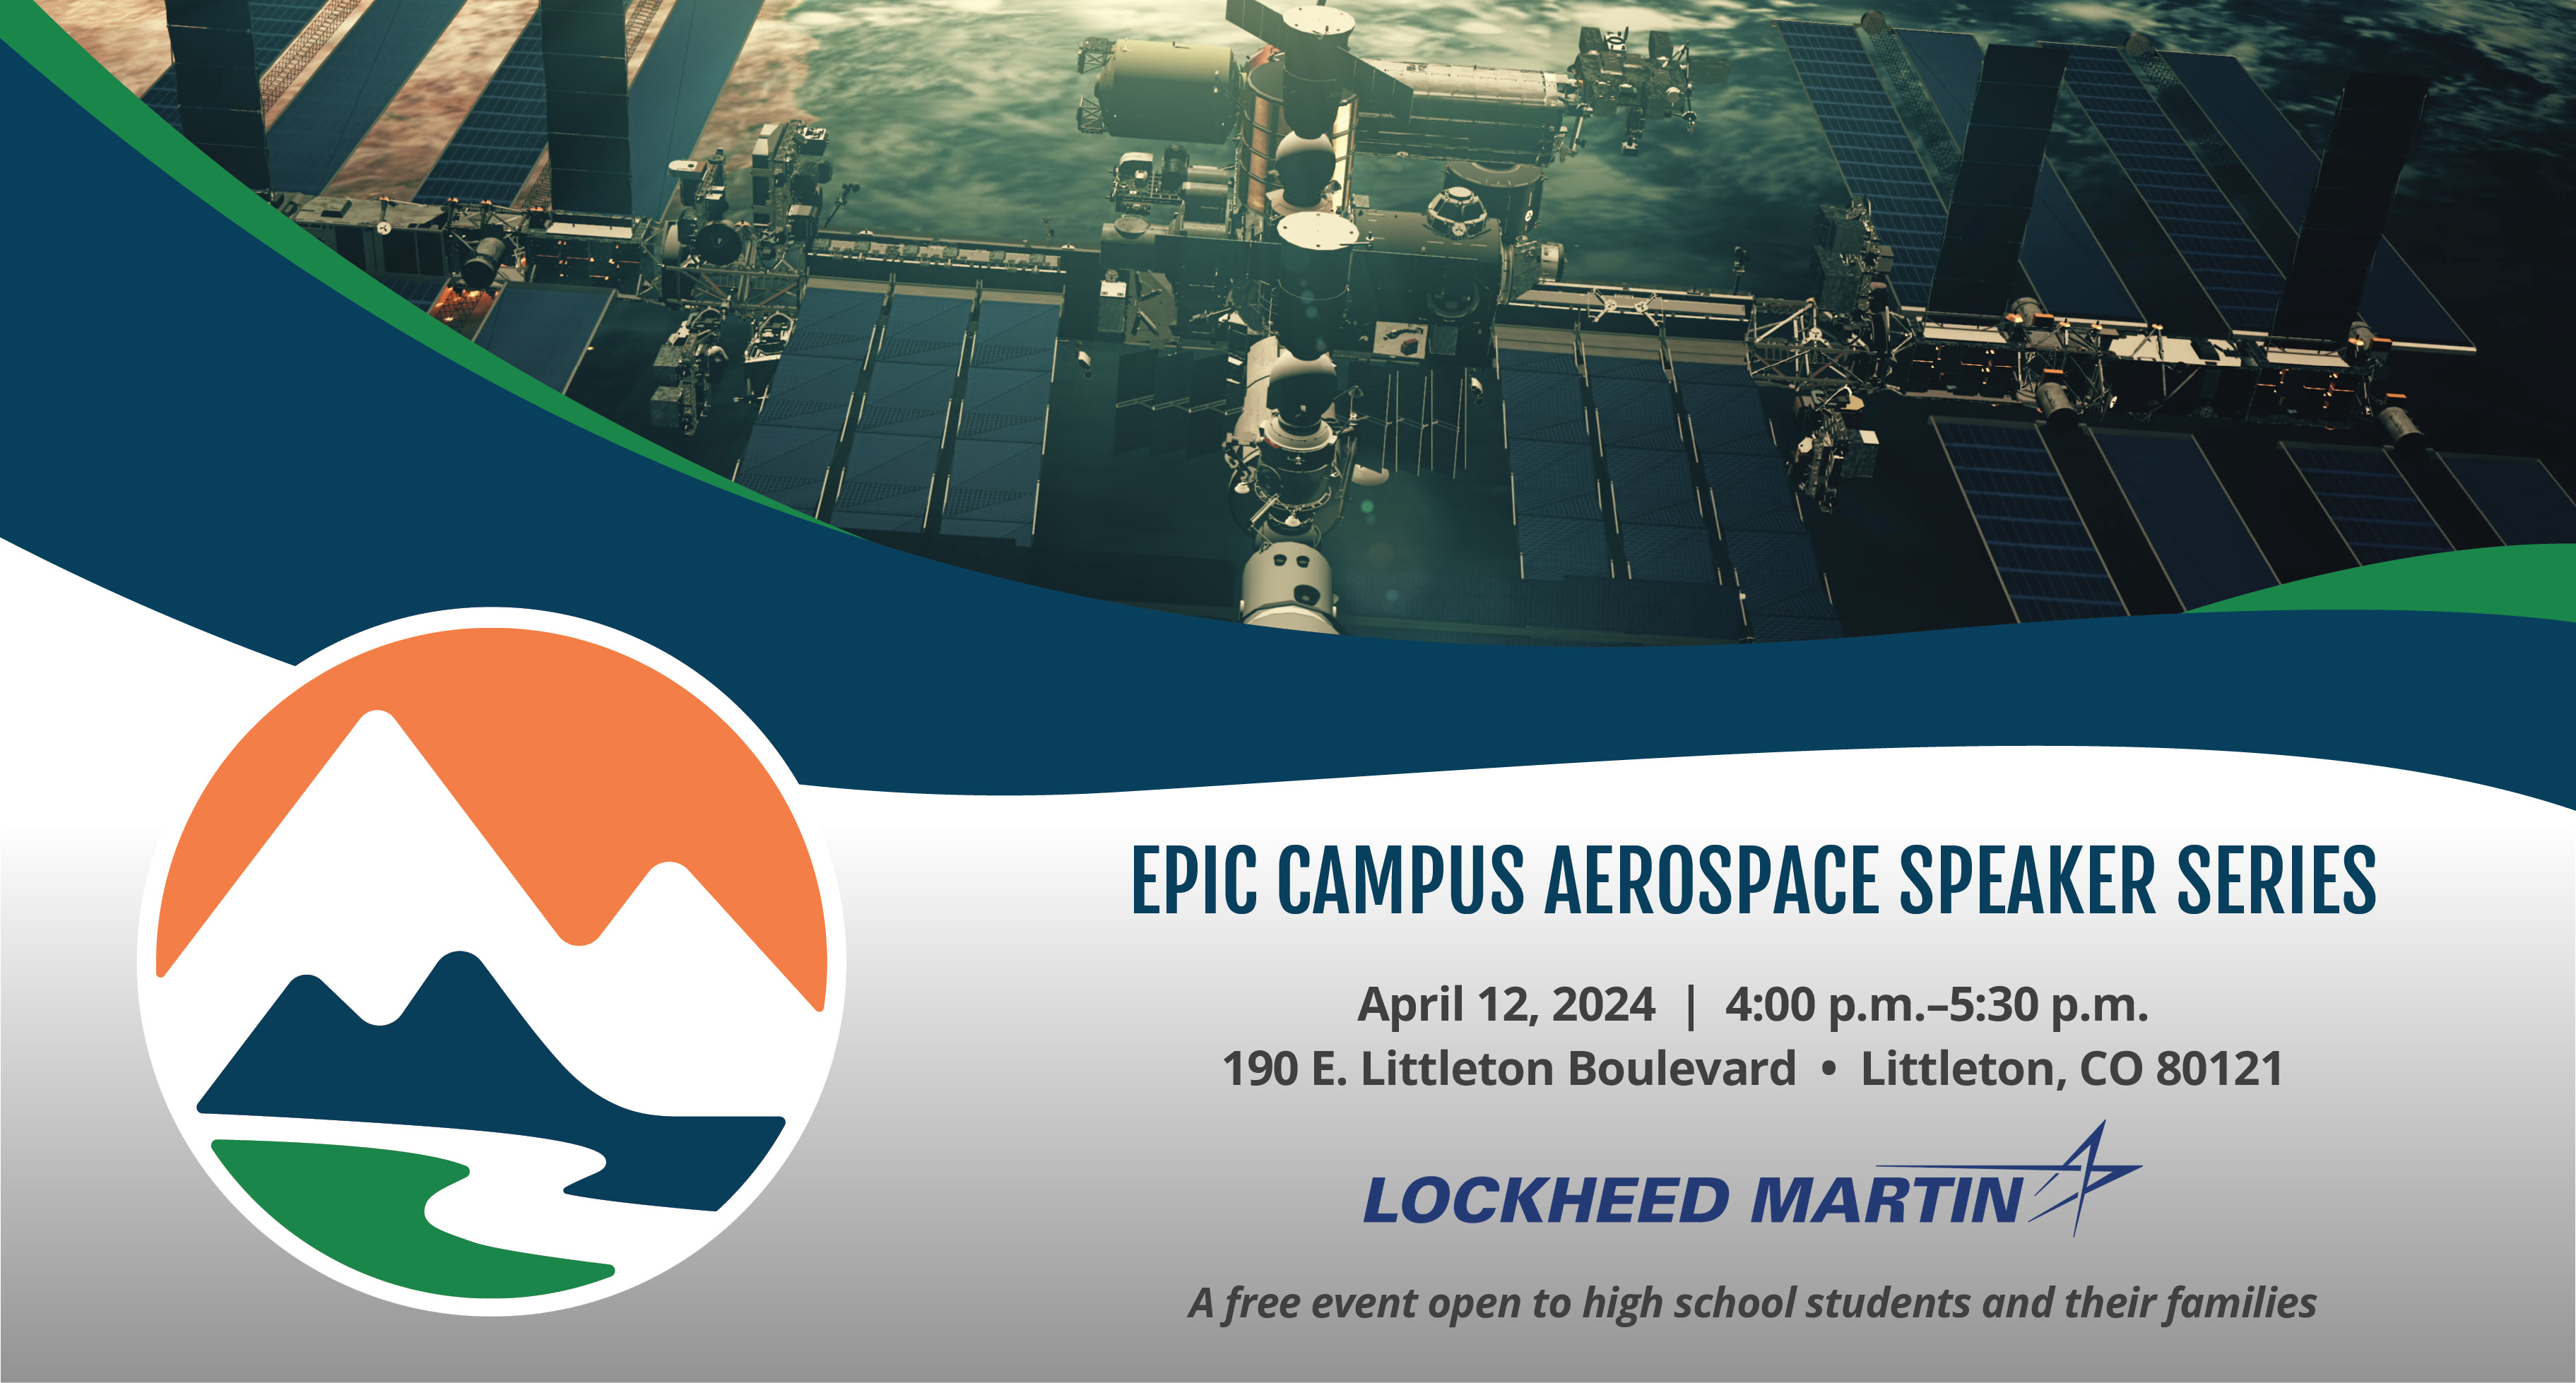 EPIC Campus Aerospace Speaker Series April 12, 2024 4-5:30 pm 190 E Littleton Blvd Littleton CO 80121| Lockheed Martin - A free event open to high school students and their families.